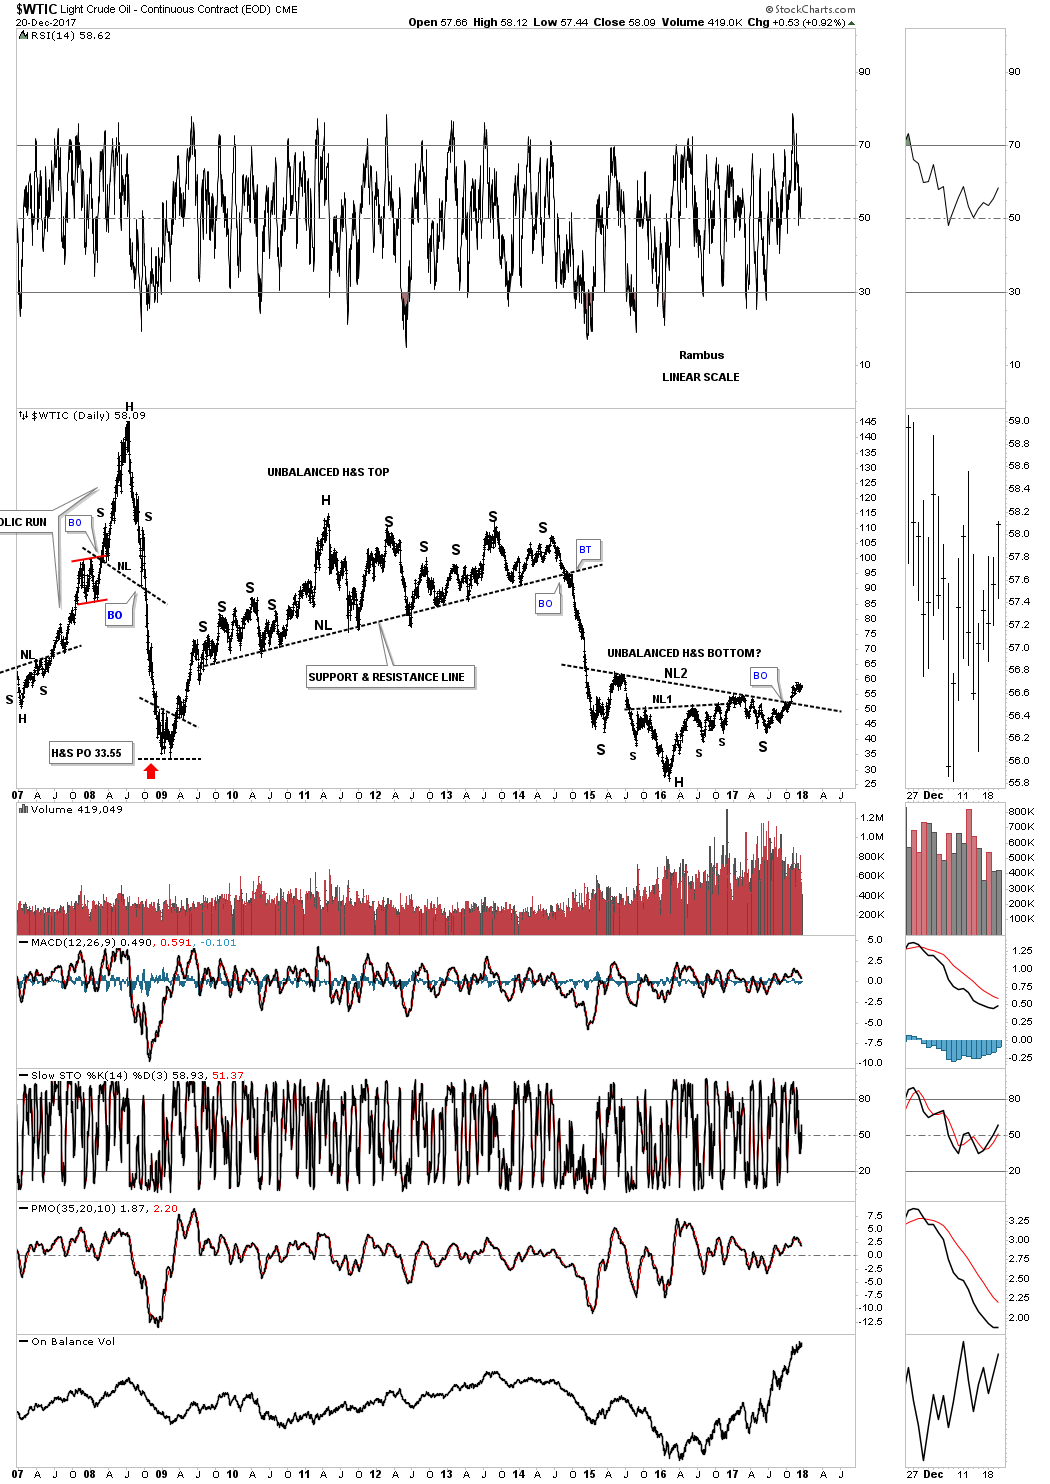 WTIC Daily 2007-2017